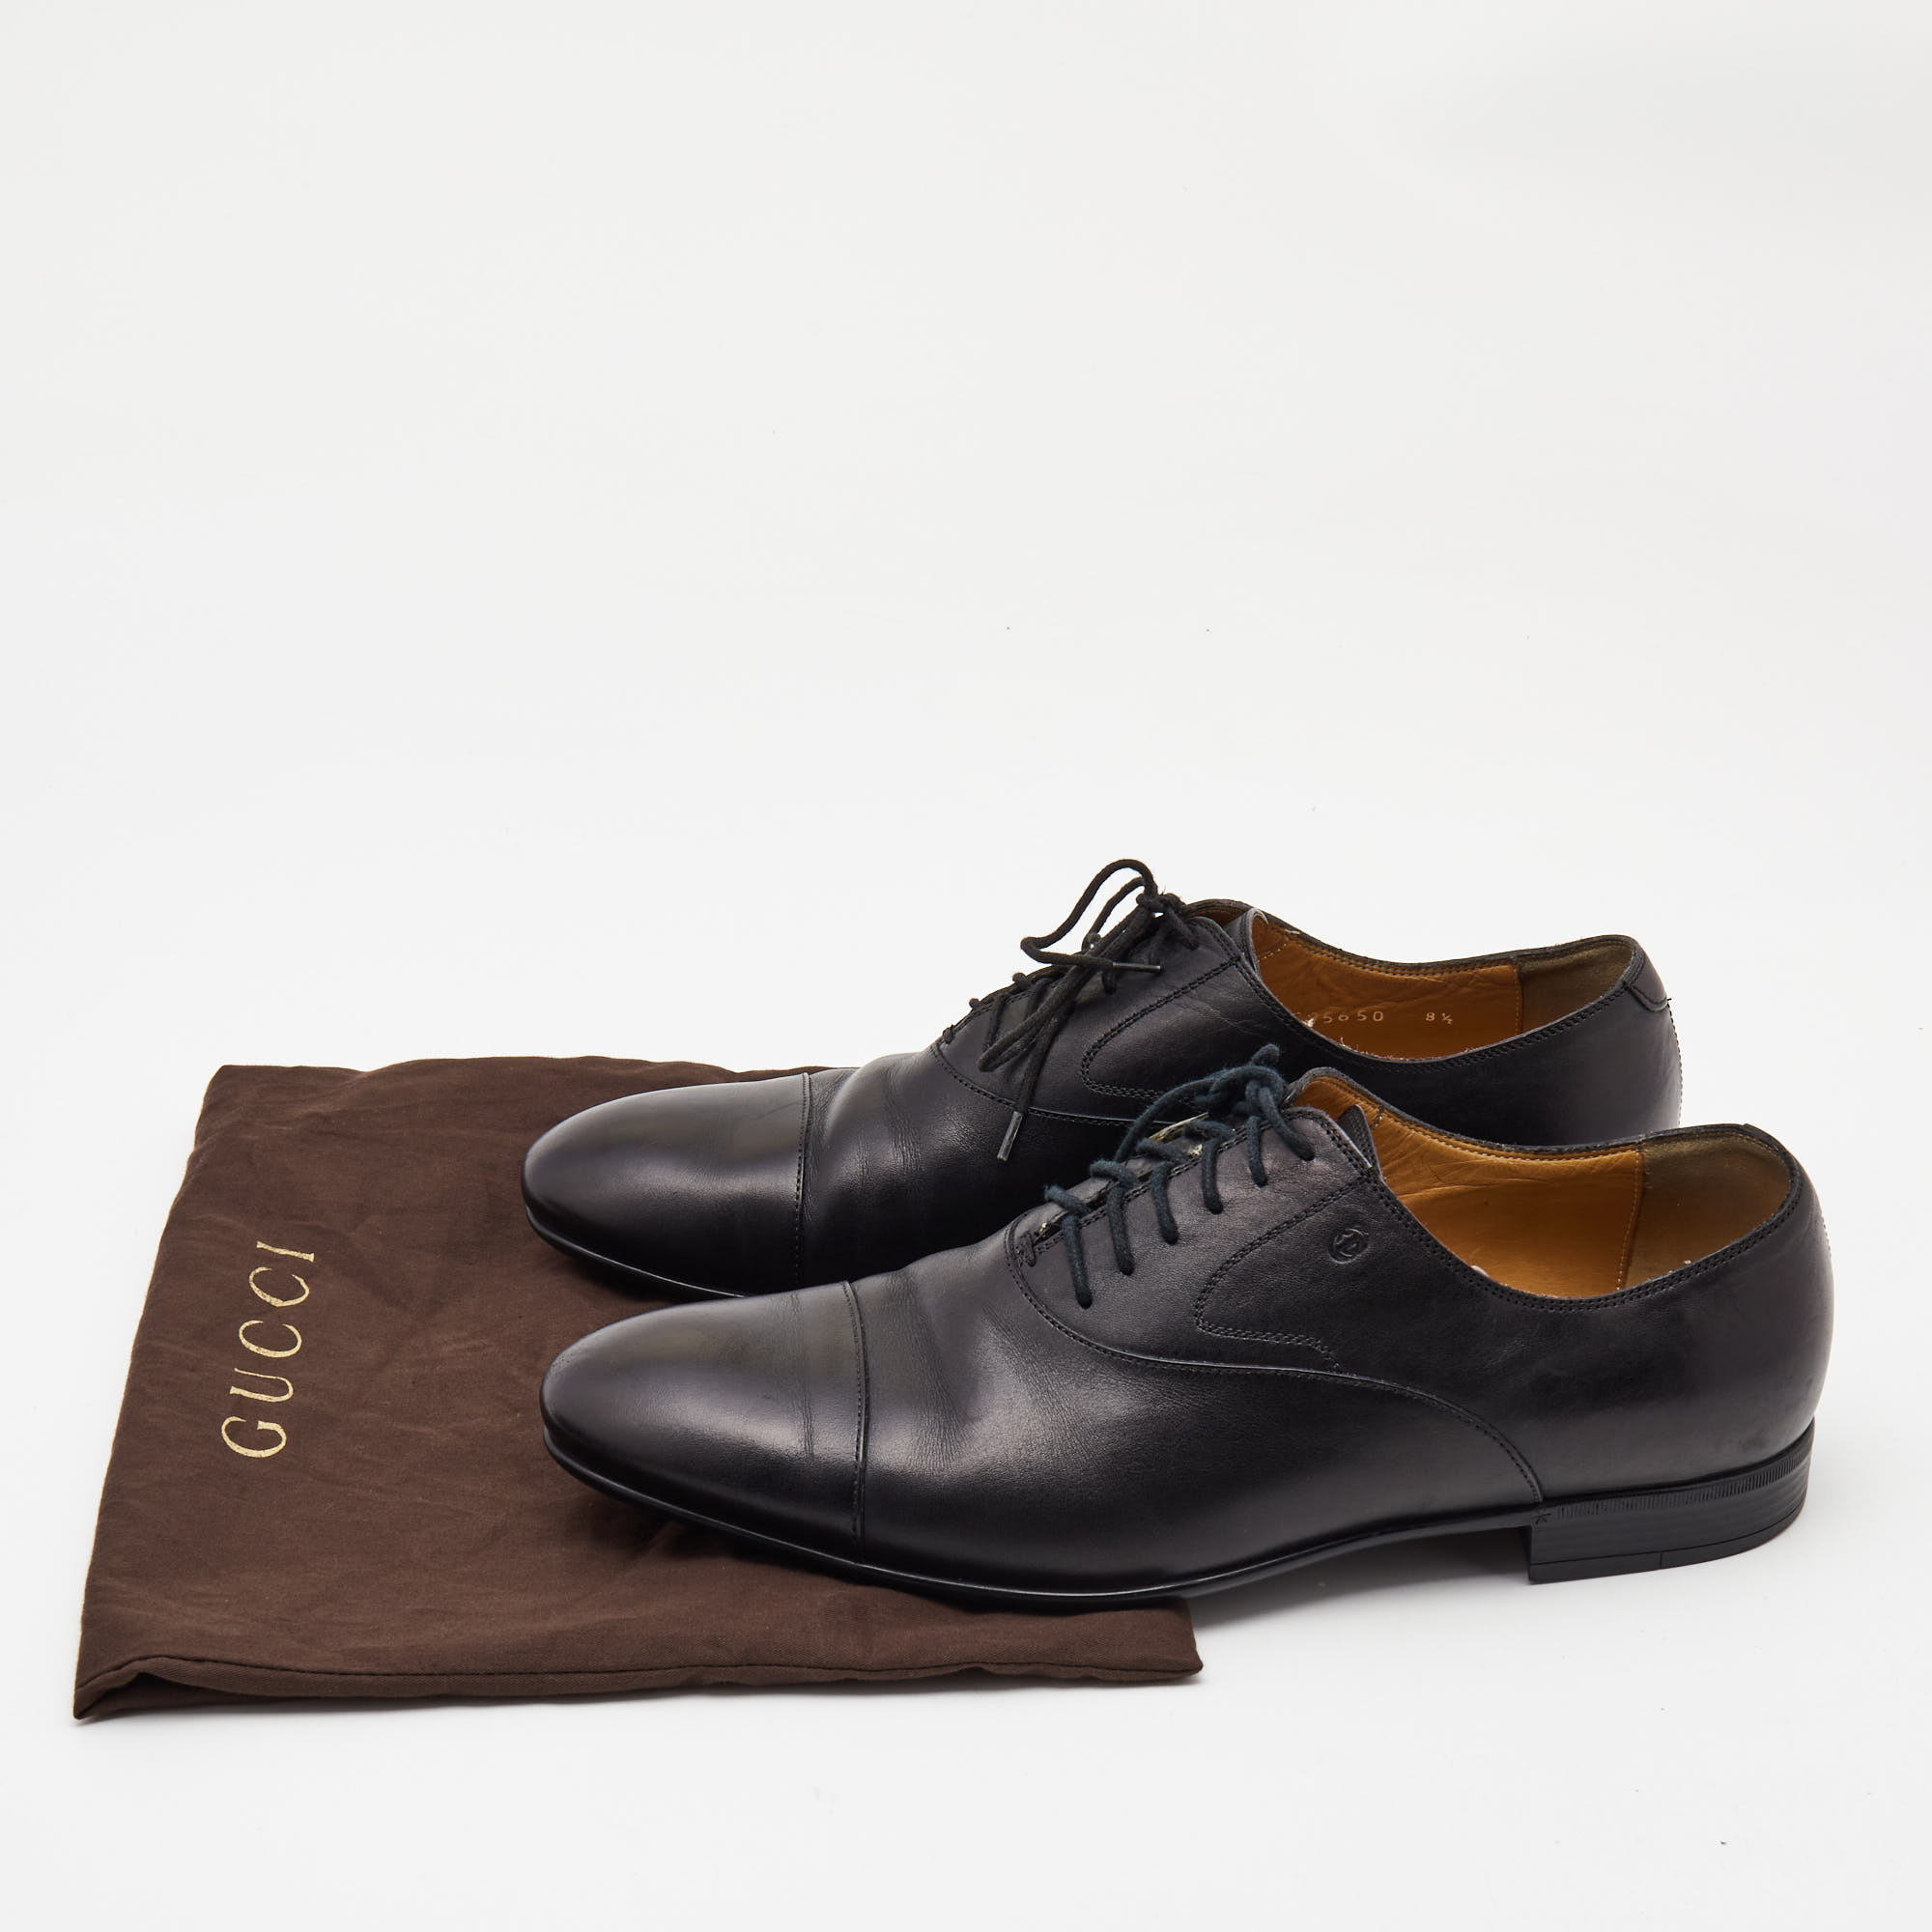 Gucci Dark Black Leather Lace Up Oxfords Size 42.5